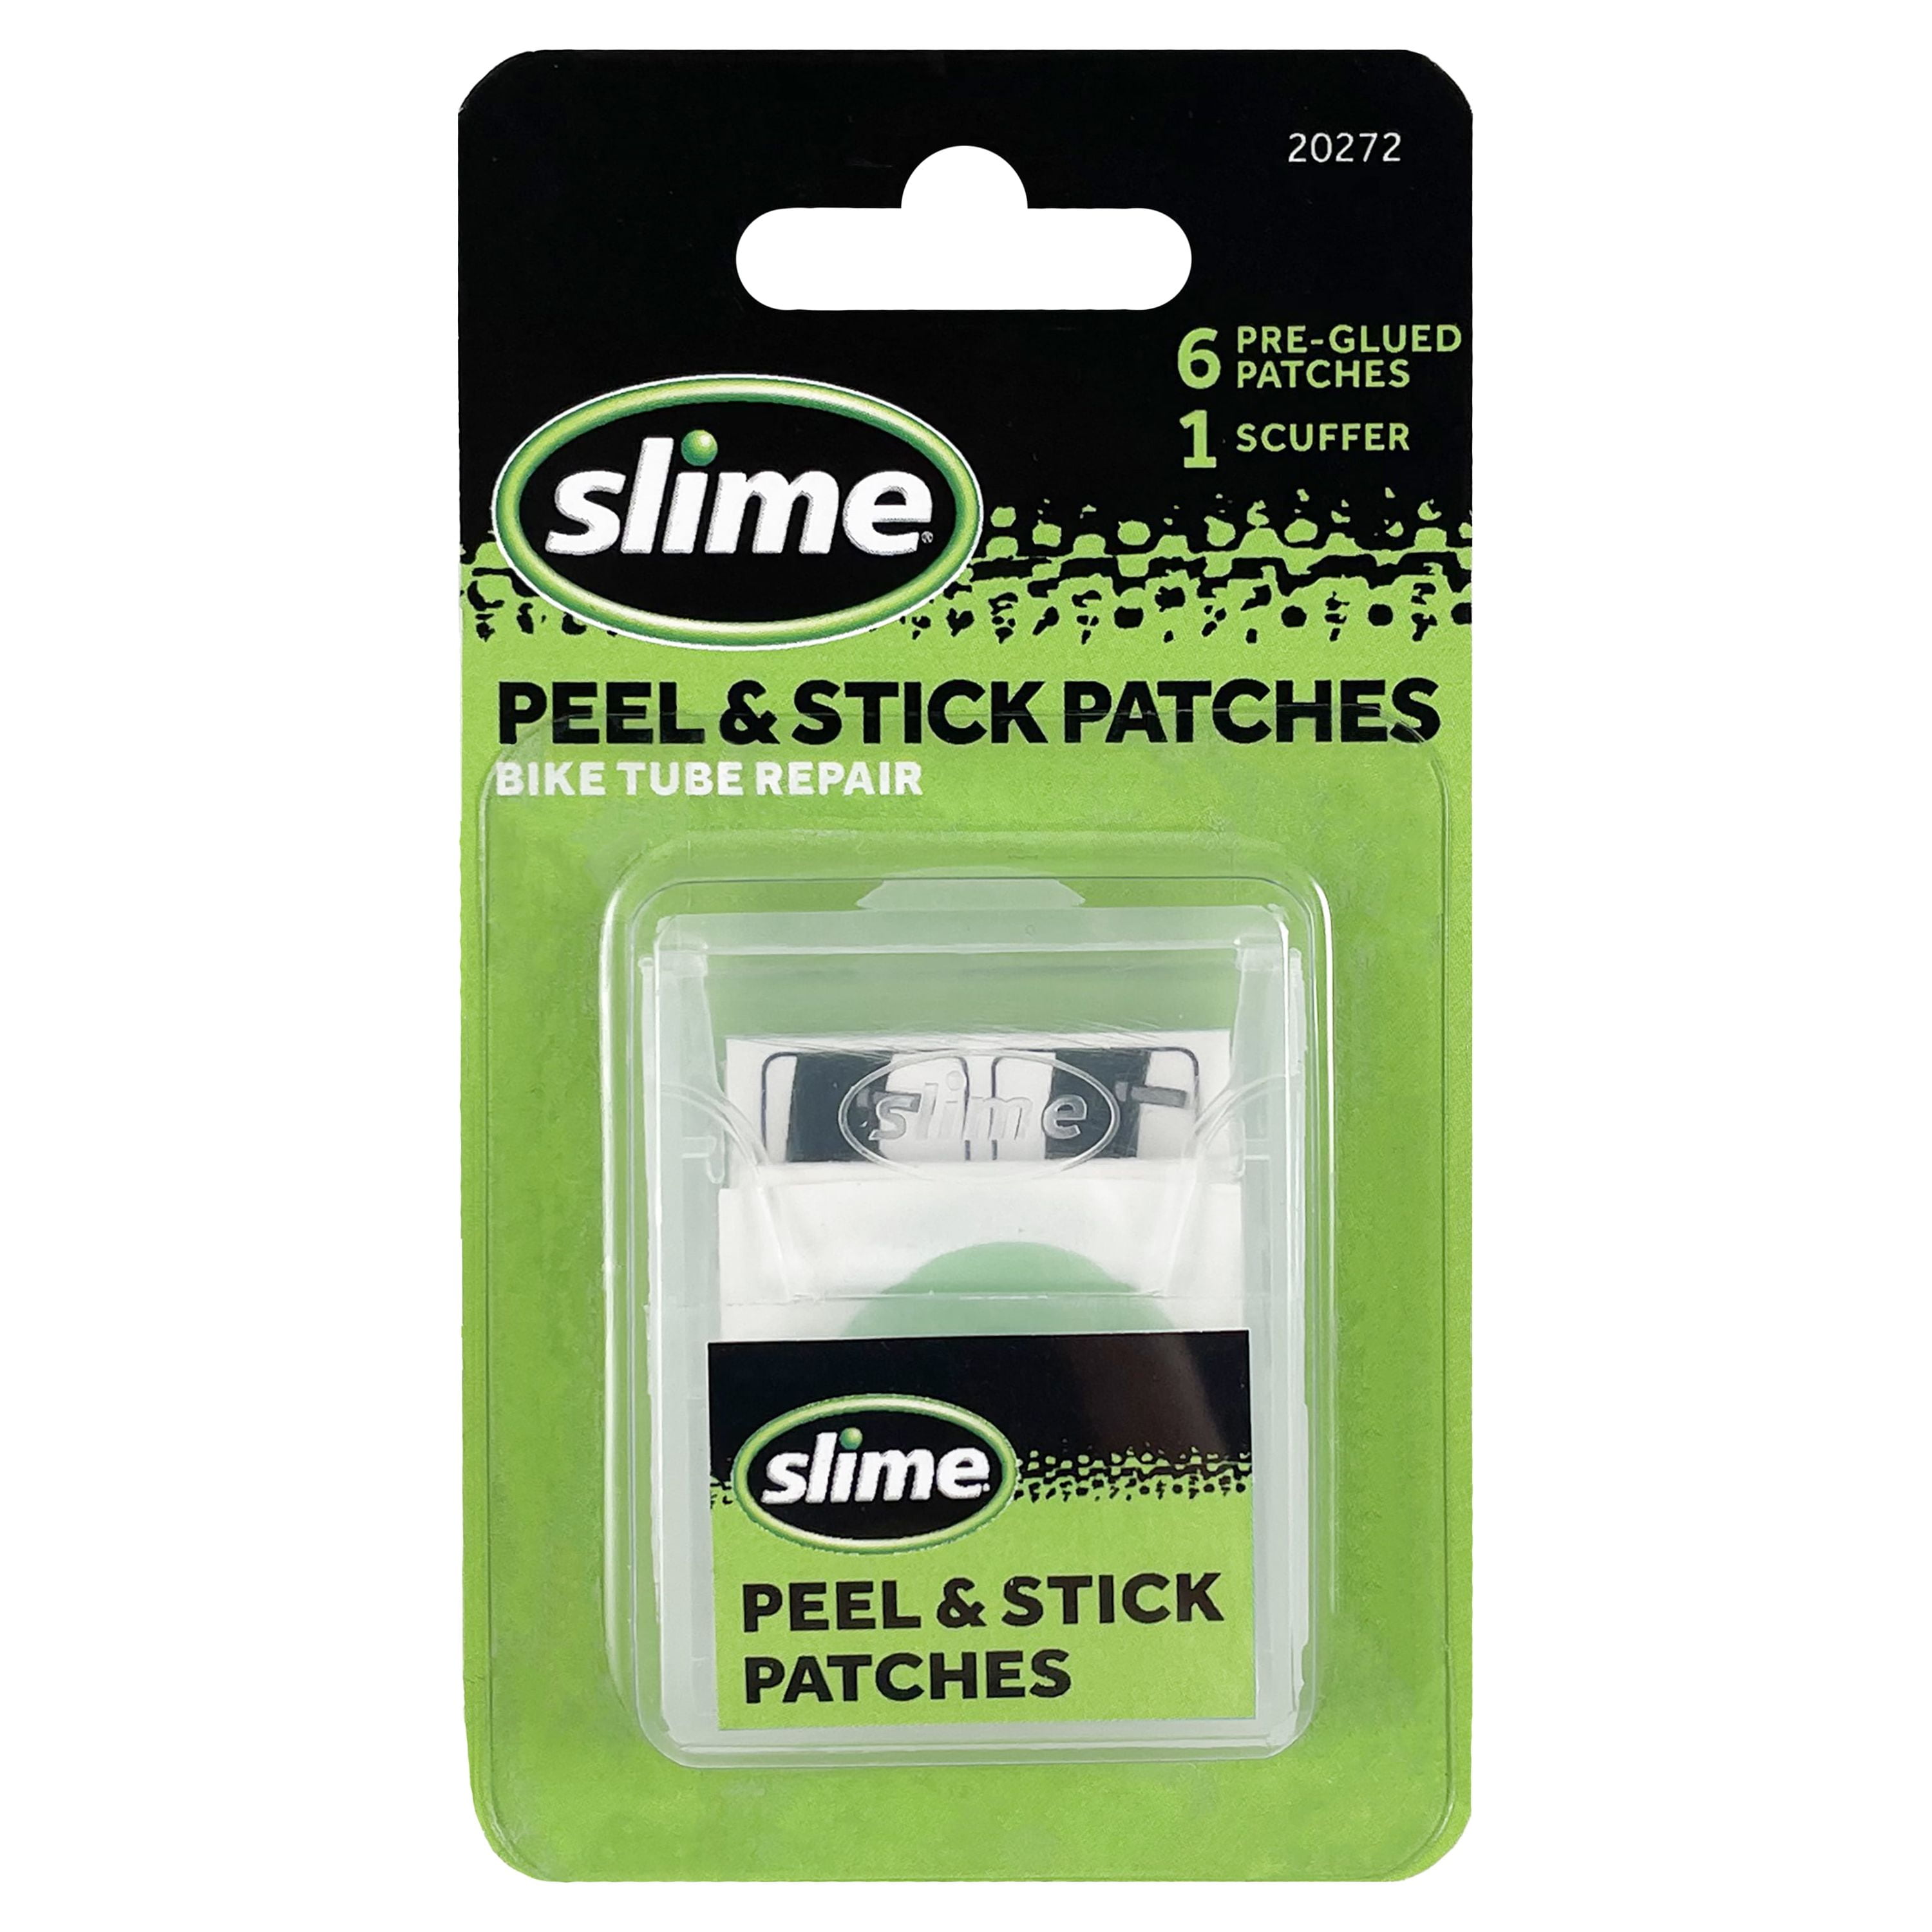 Slime Peel & Stick Bicycle Tube Patches, 6pc - 20272 